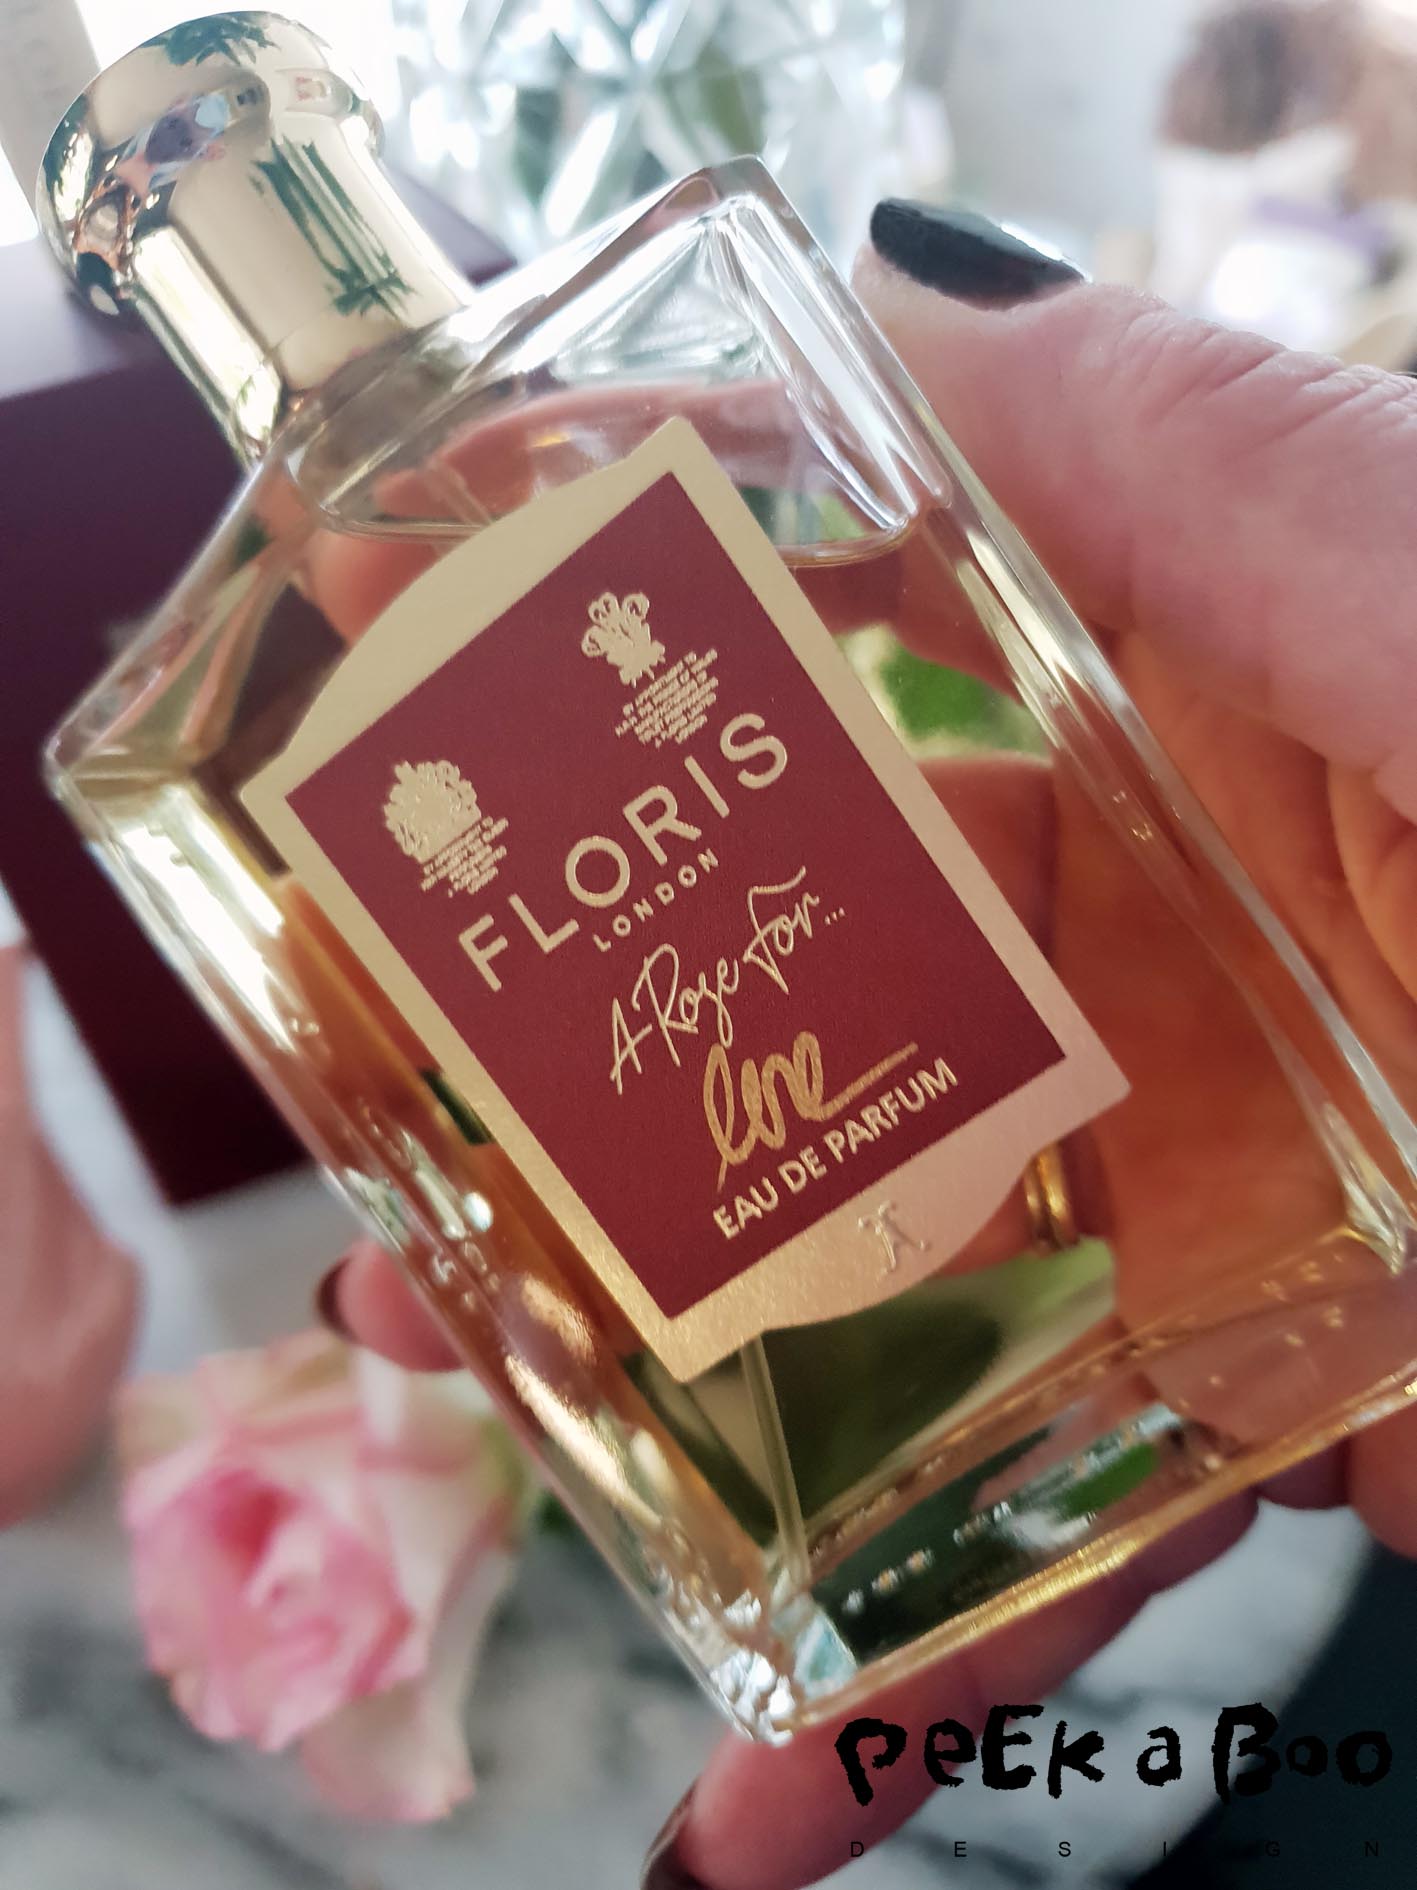 loris London is a family owned perfumery since 1730.